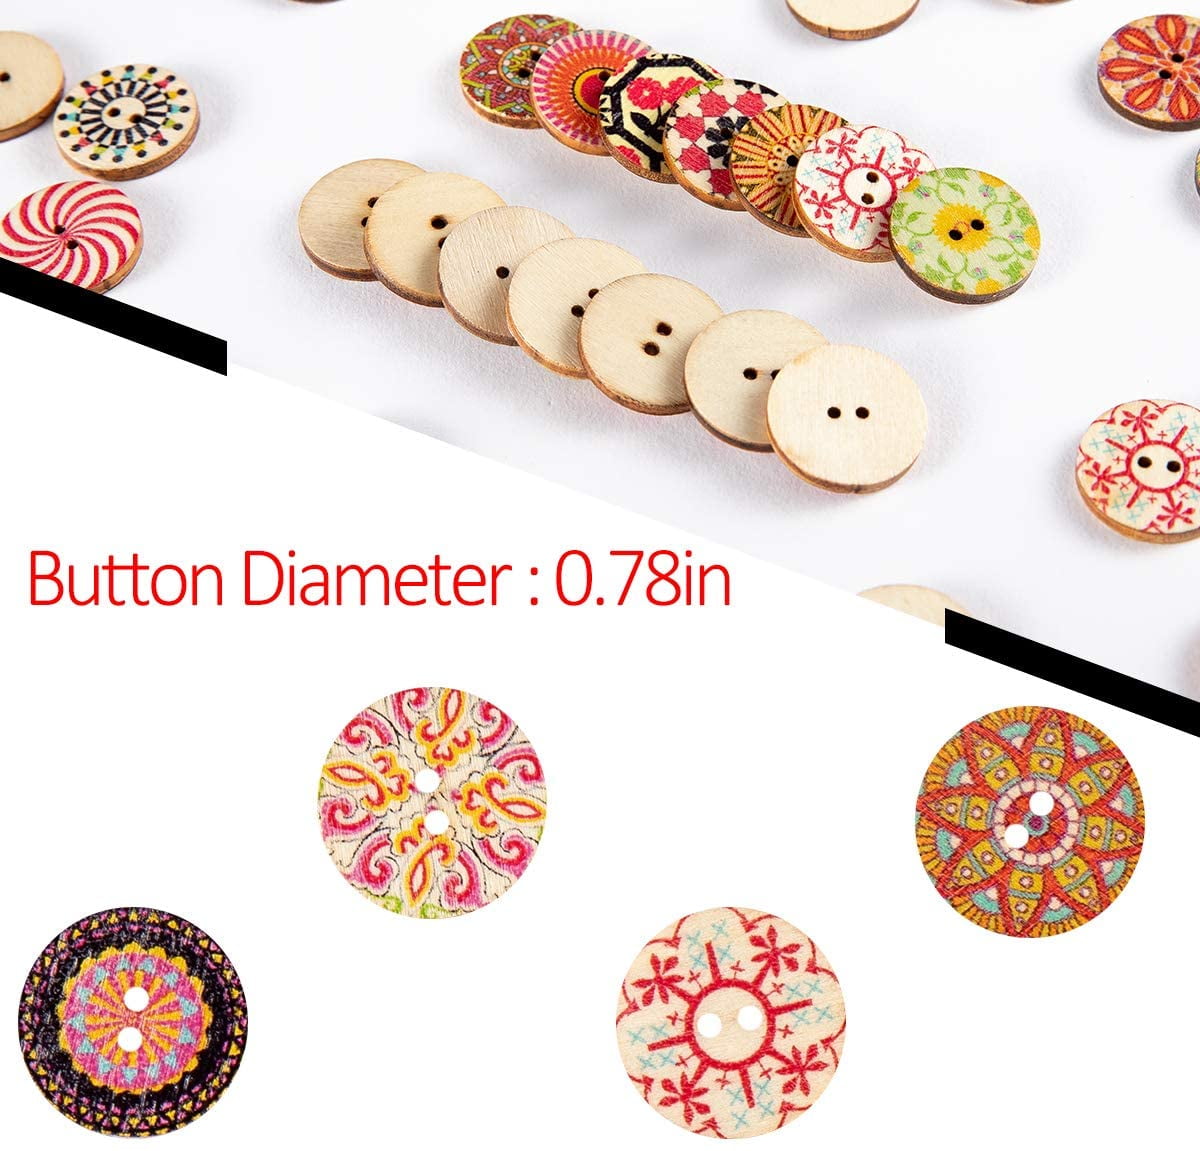 300pcs Mixed Round Wooden Colorful Buttons Crafting Buttons With 2 Holes  For Arts Knitting Sewing Di